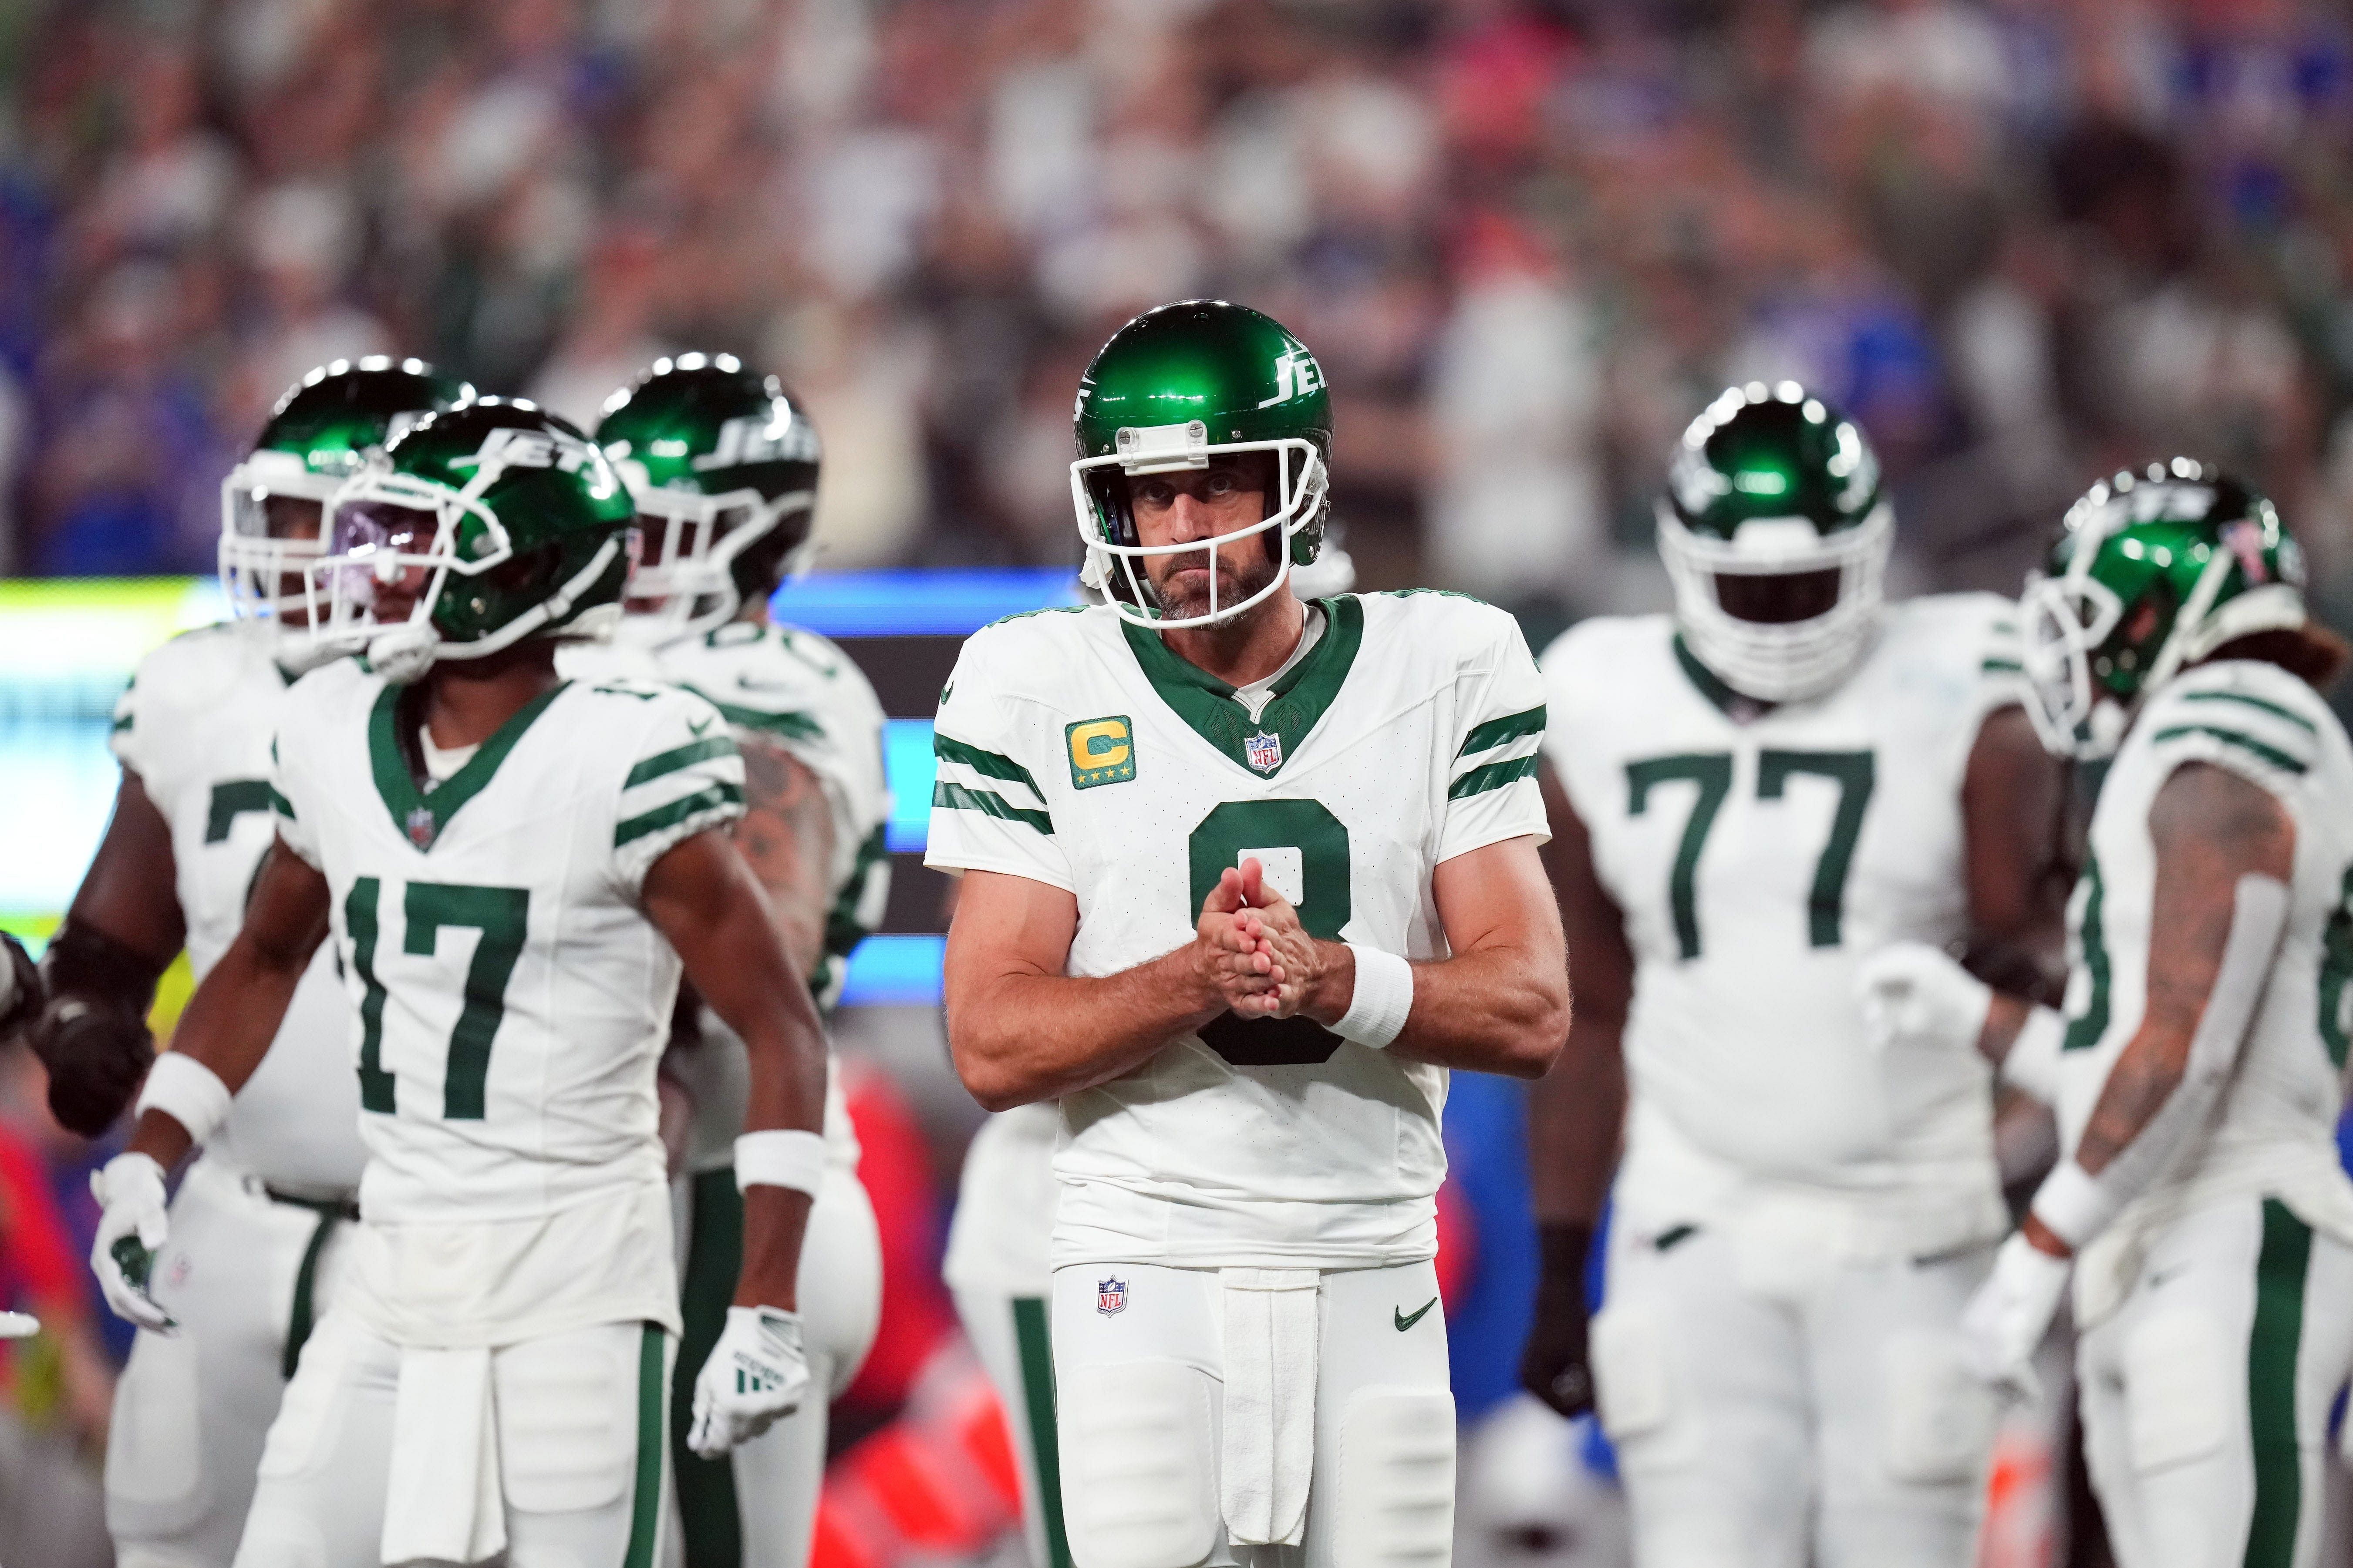 The Jets went all out to surround Aaron Rodgers with help